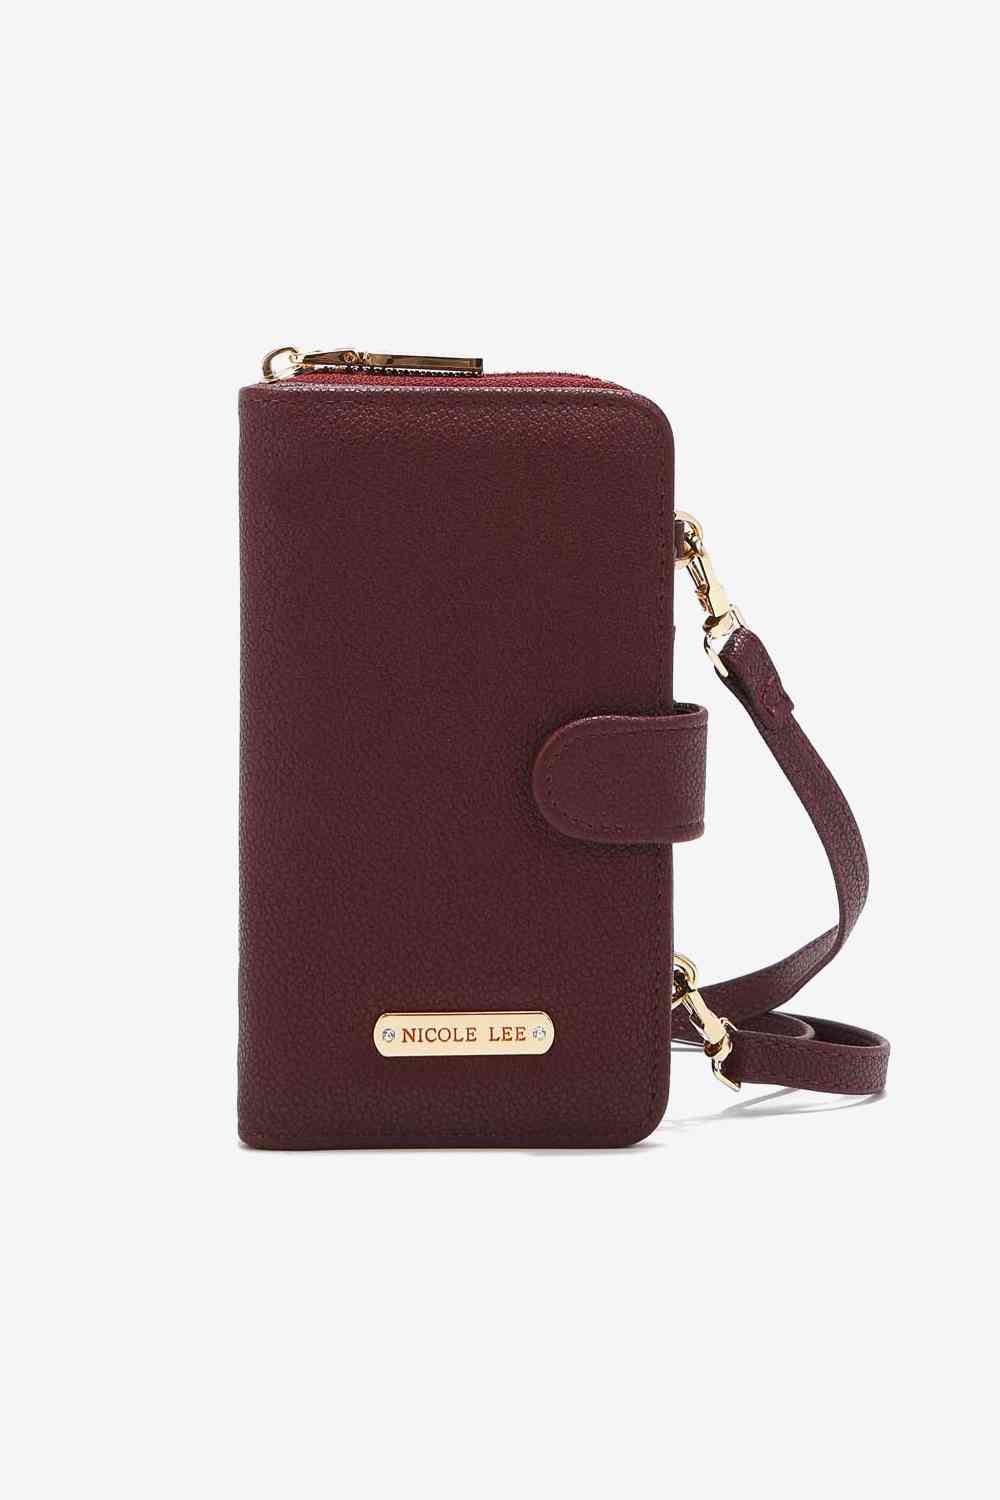 Nicole Lee USA Two-Piece Crossbody Phone Case Wallet - Three Bears Boutique